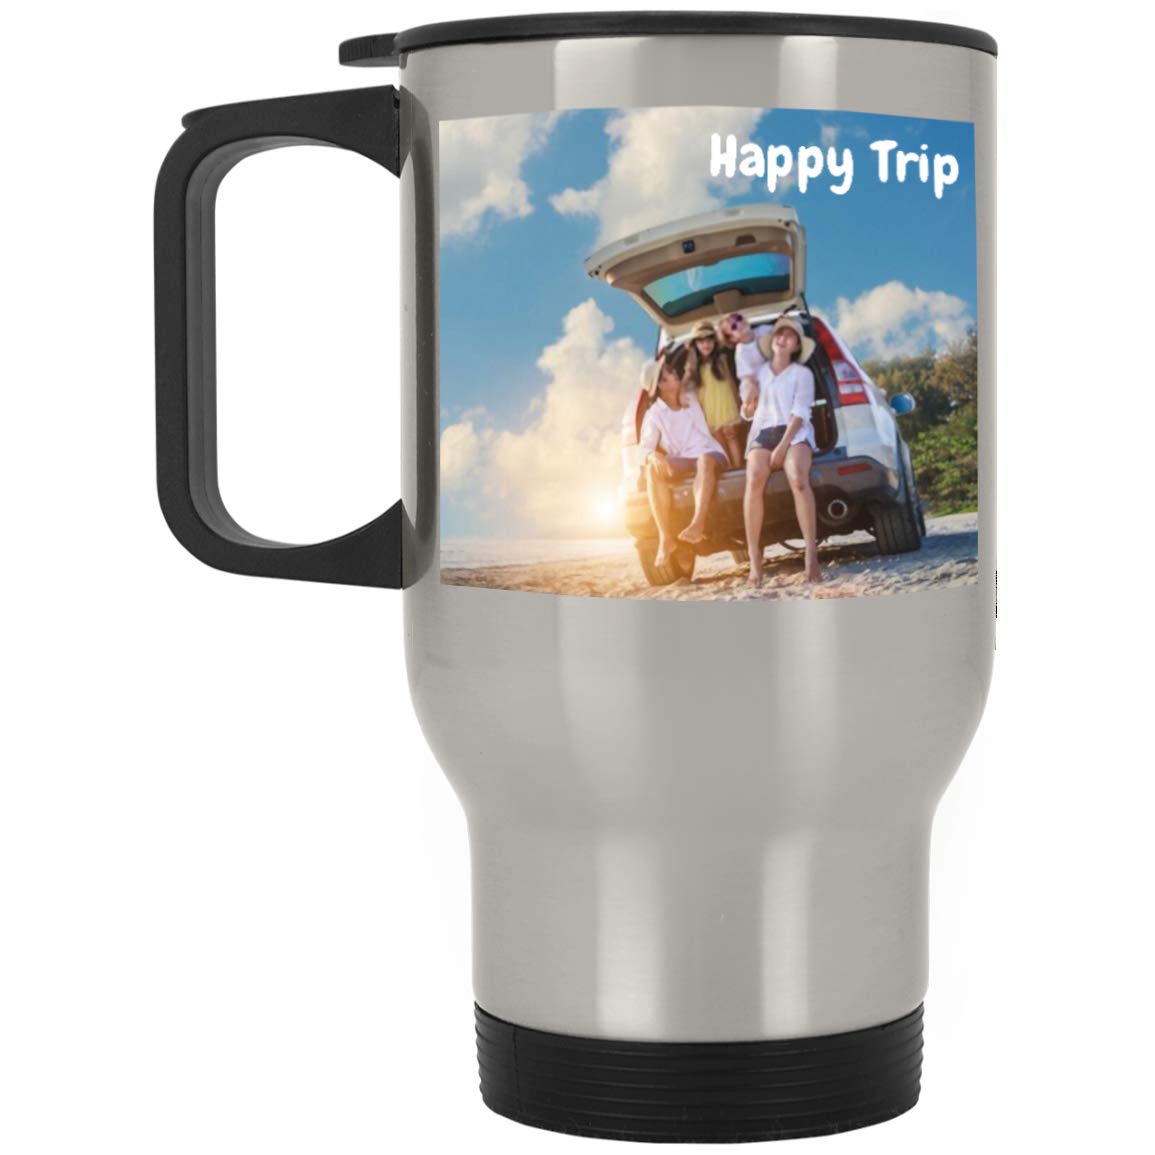 Personalized Travel Mugs Custom Travel Tumbler with Photo Picture Logo Text 14 OZ Photo Coffee Mug Tea Cup for Mom Dad Family Friends Gift for Birthday Anniversary Mother's Day Holiday